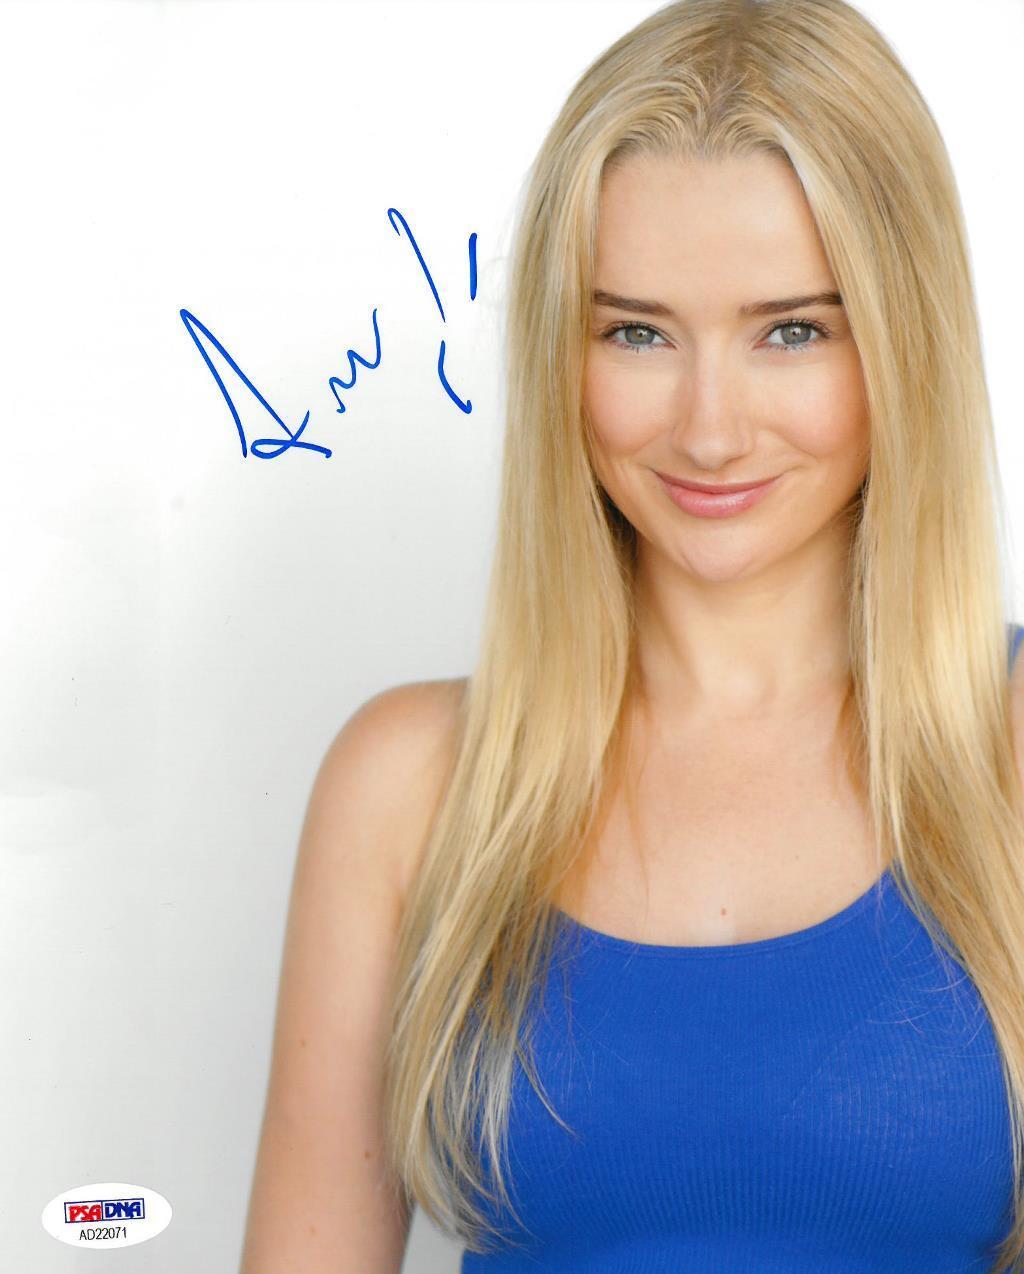 Amy Shiels Signed Authentic Autographed 8x10 Photo Poster painting PSA/DNA #AD22071